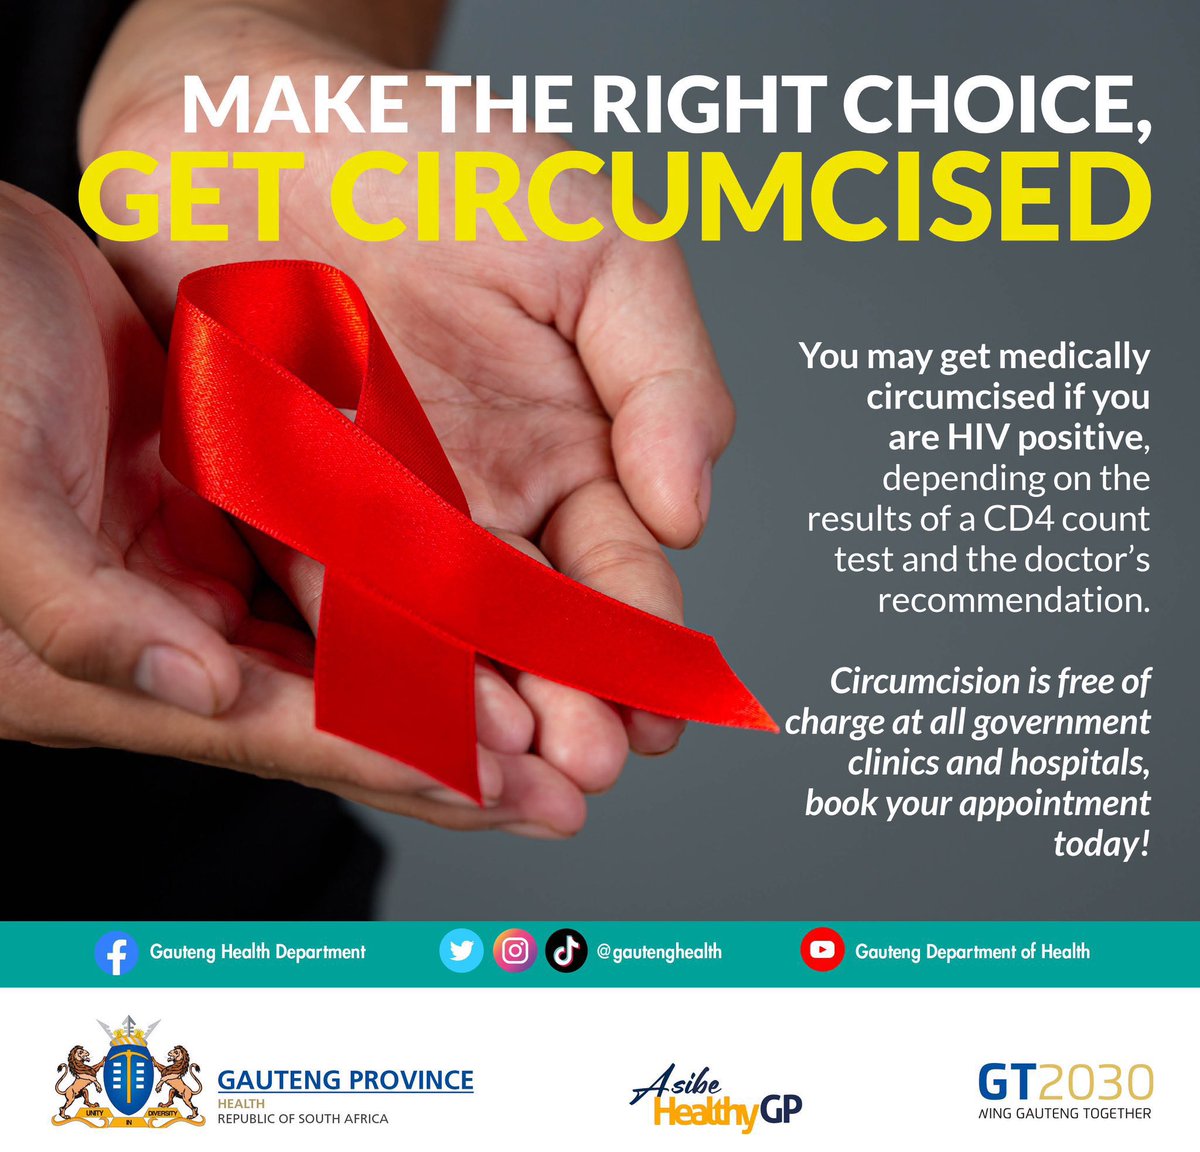 Circumcision reduces HIV infection by 60%. However, even if you’re positive, you can still get circumcised. You’ll be offered support and if you’re not on ARVs, you’ll be initiated & a future appointment will be made for you if you’re not eligible at the time #MakeTheRightChoice